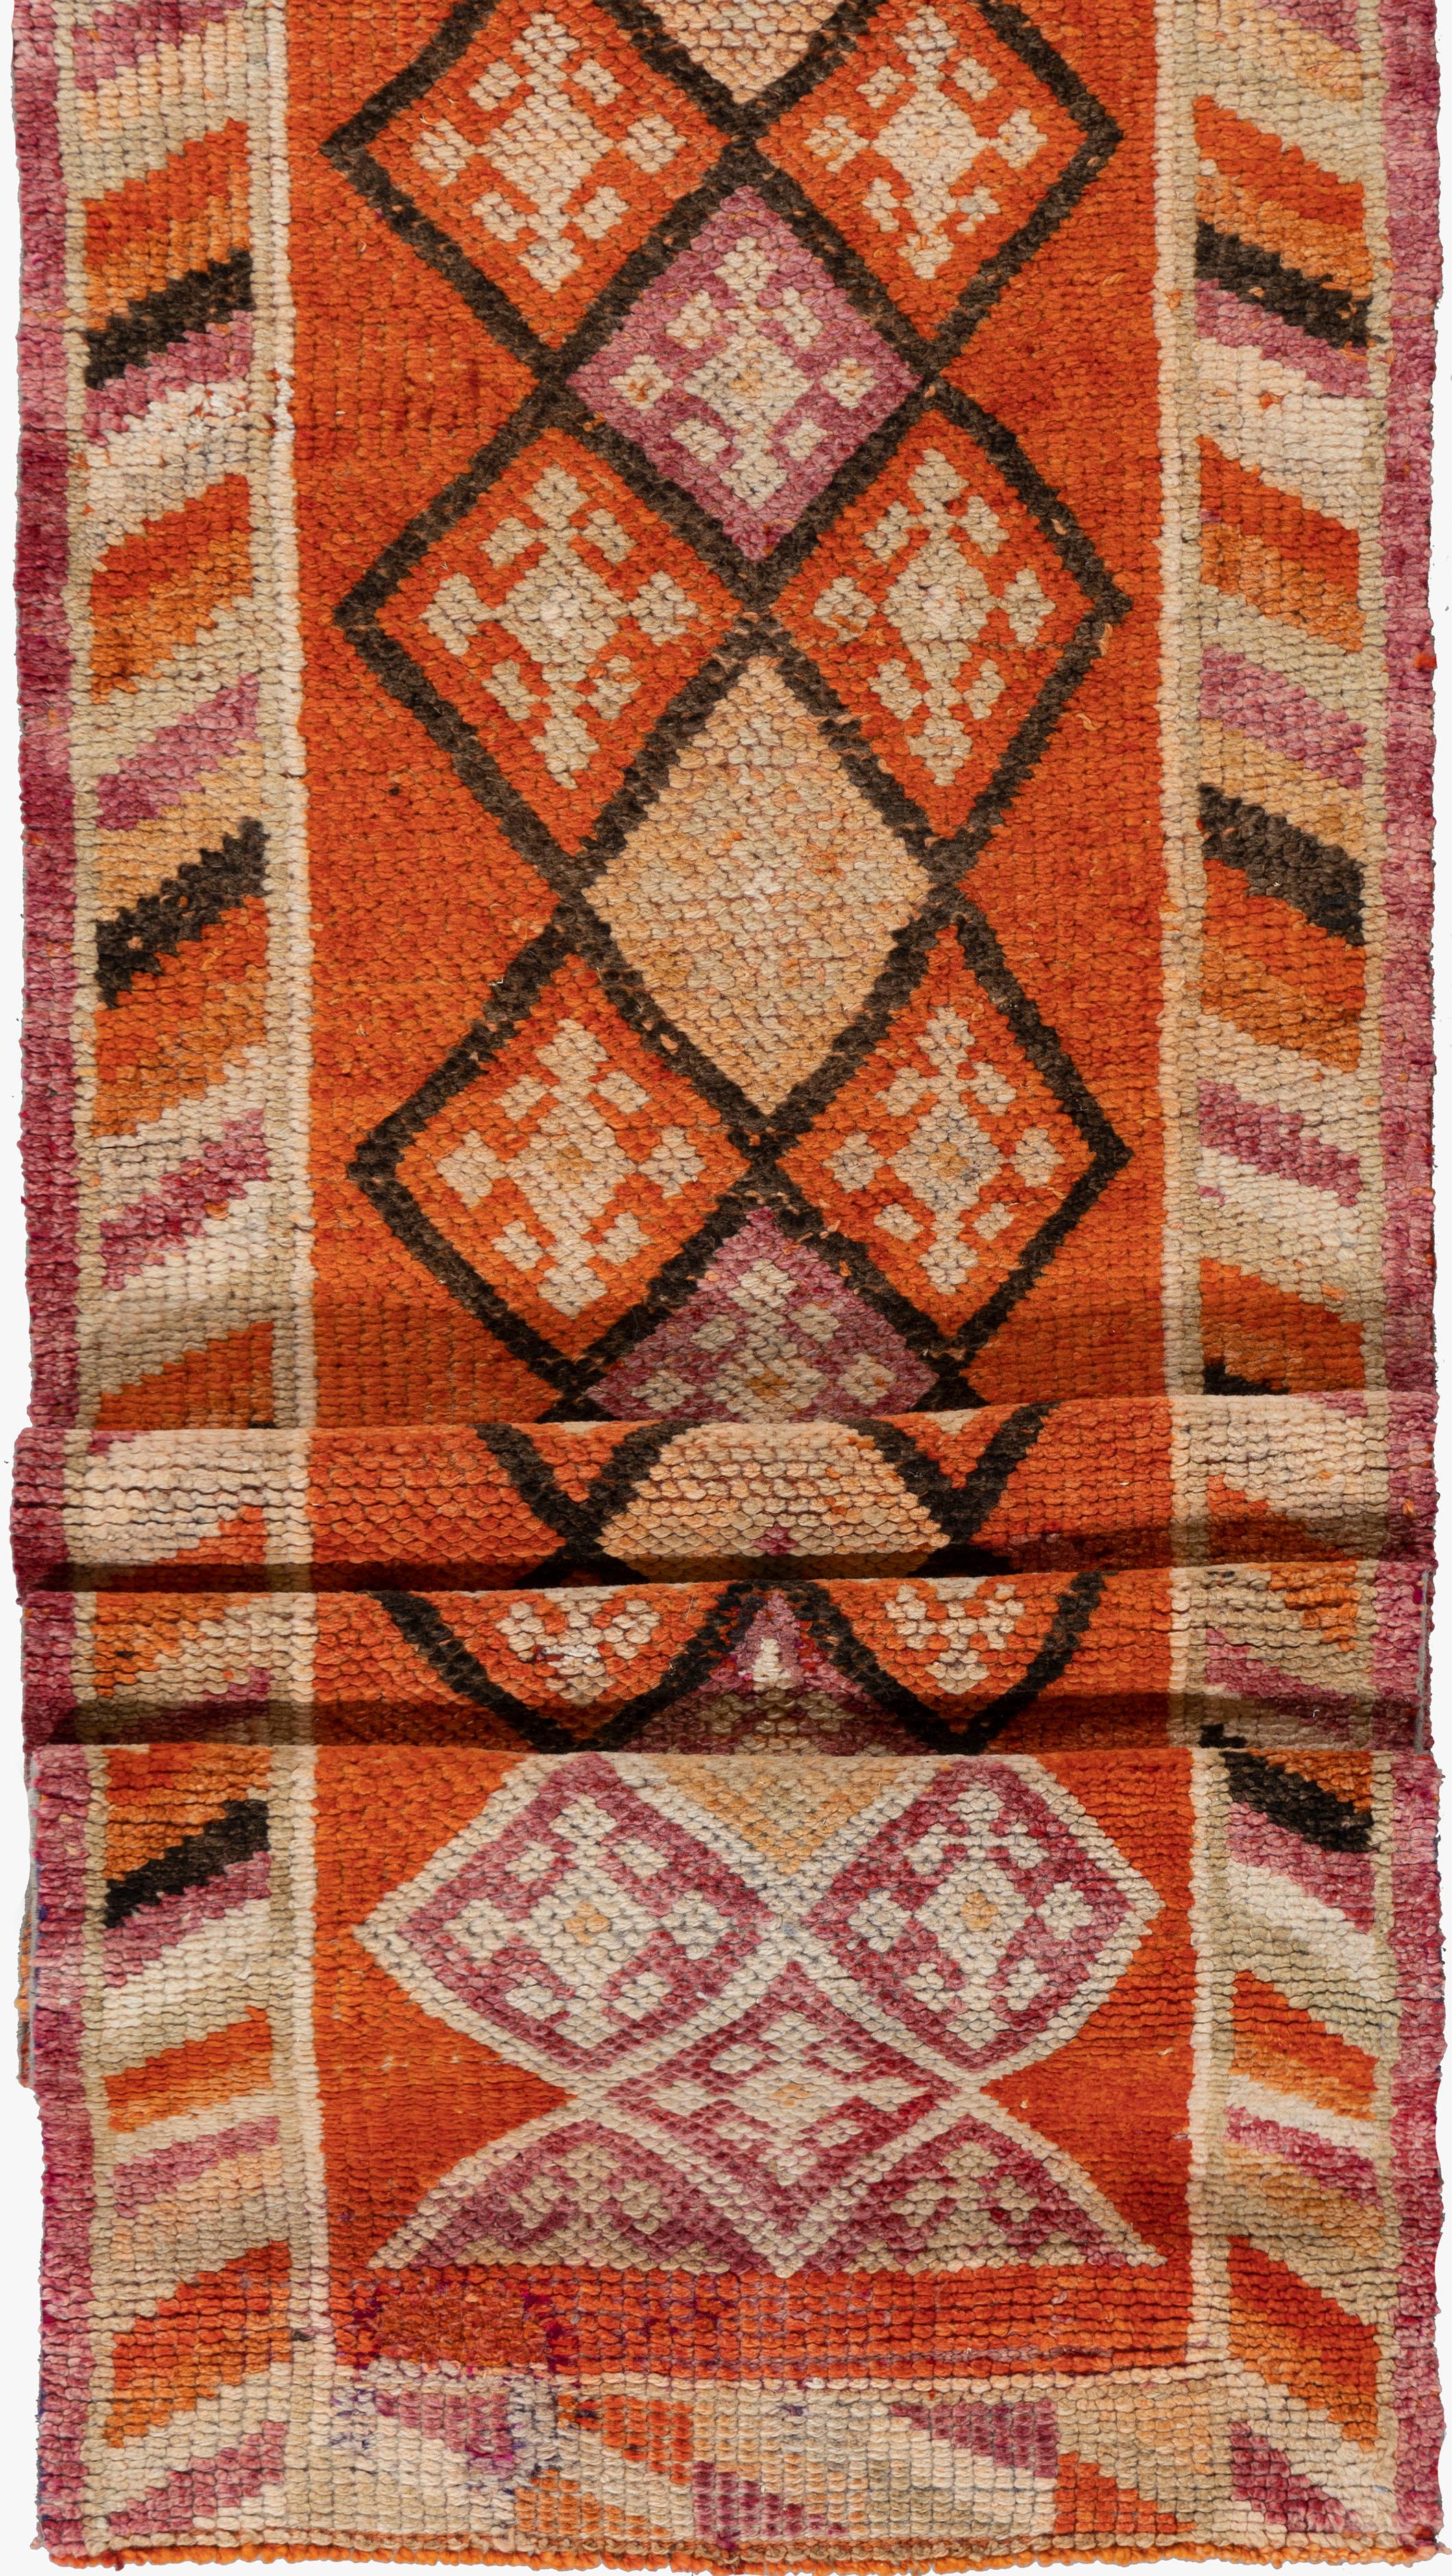 Vintage Turkish Oushak Runner 2'5 x 12'4. These attractive rugs are suitable for a wide variety of places, but the significant effect of Oushaks is that they bring space together, making it cozy and warm. The artistic technique of weaving Oushak's